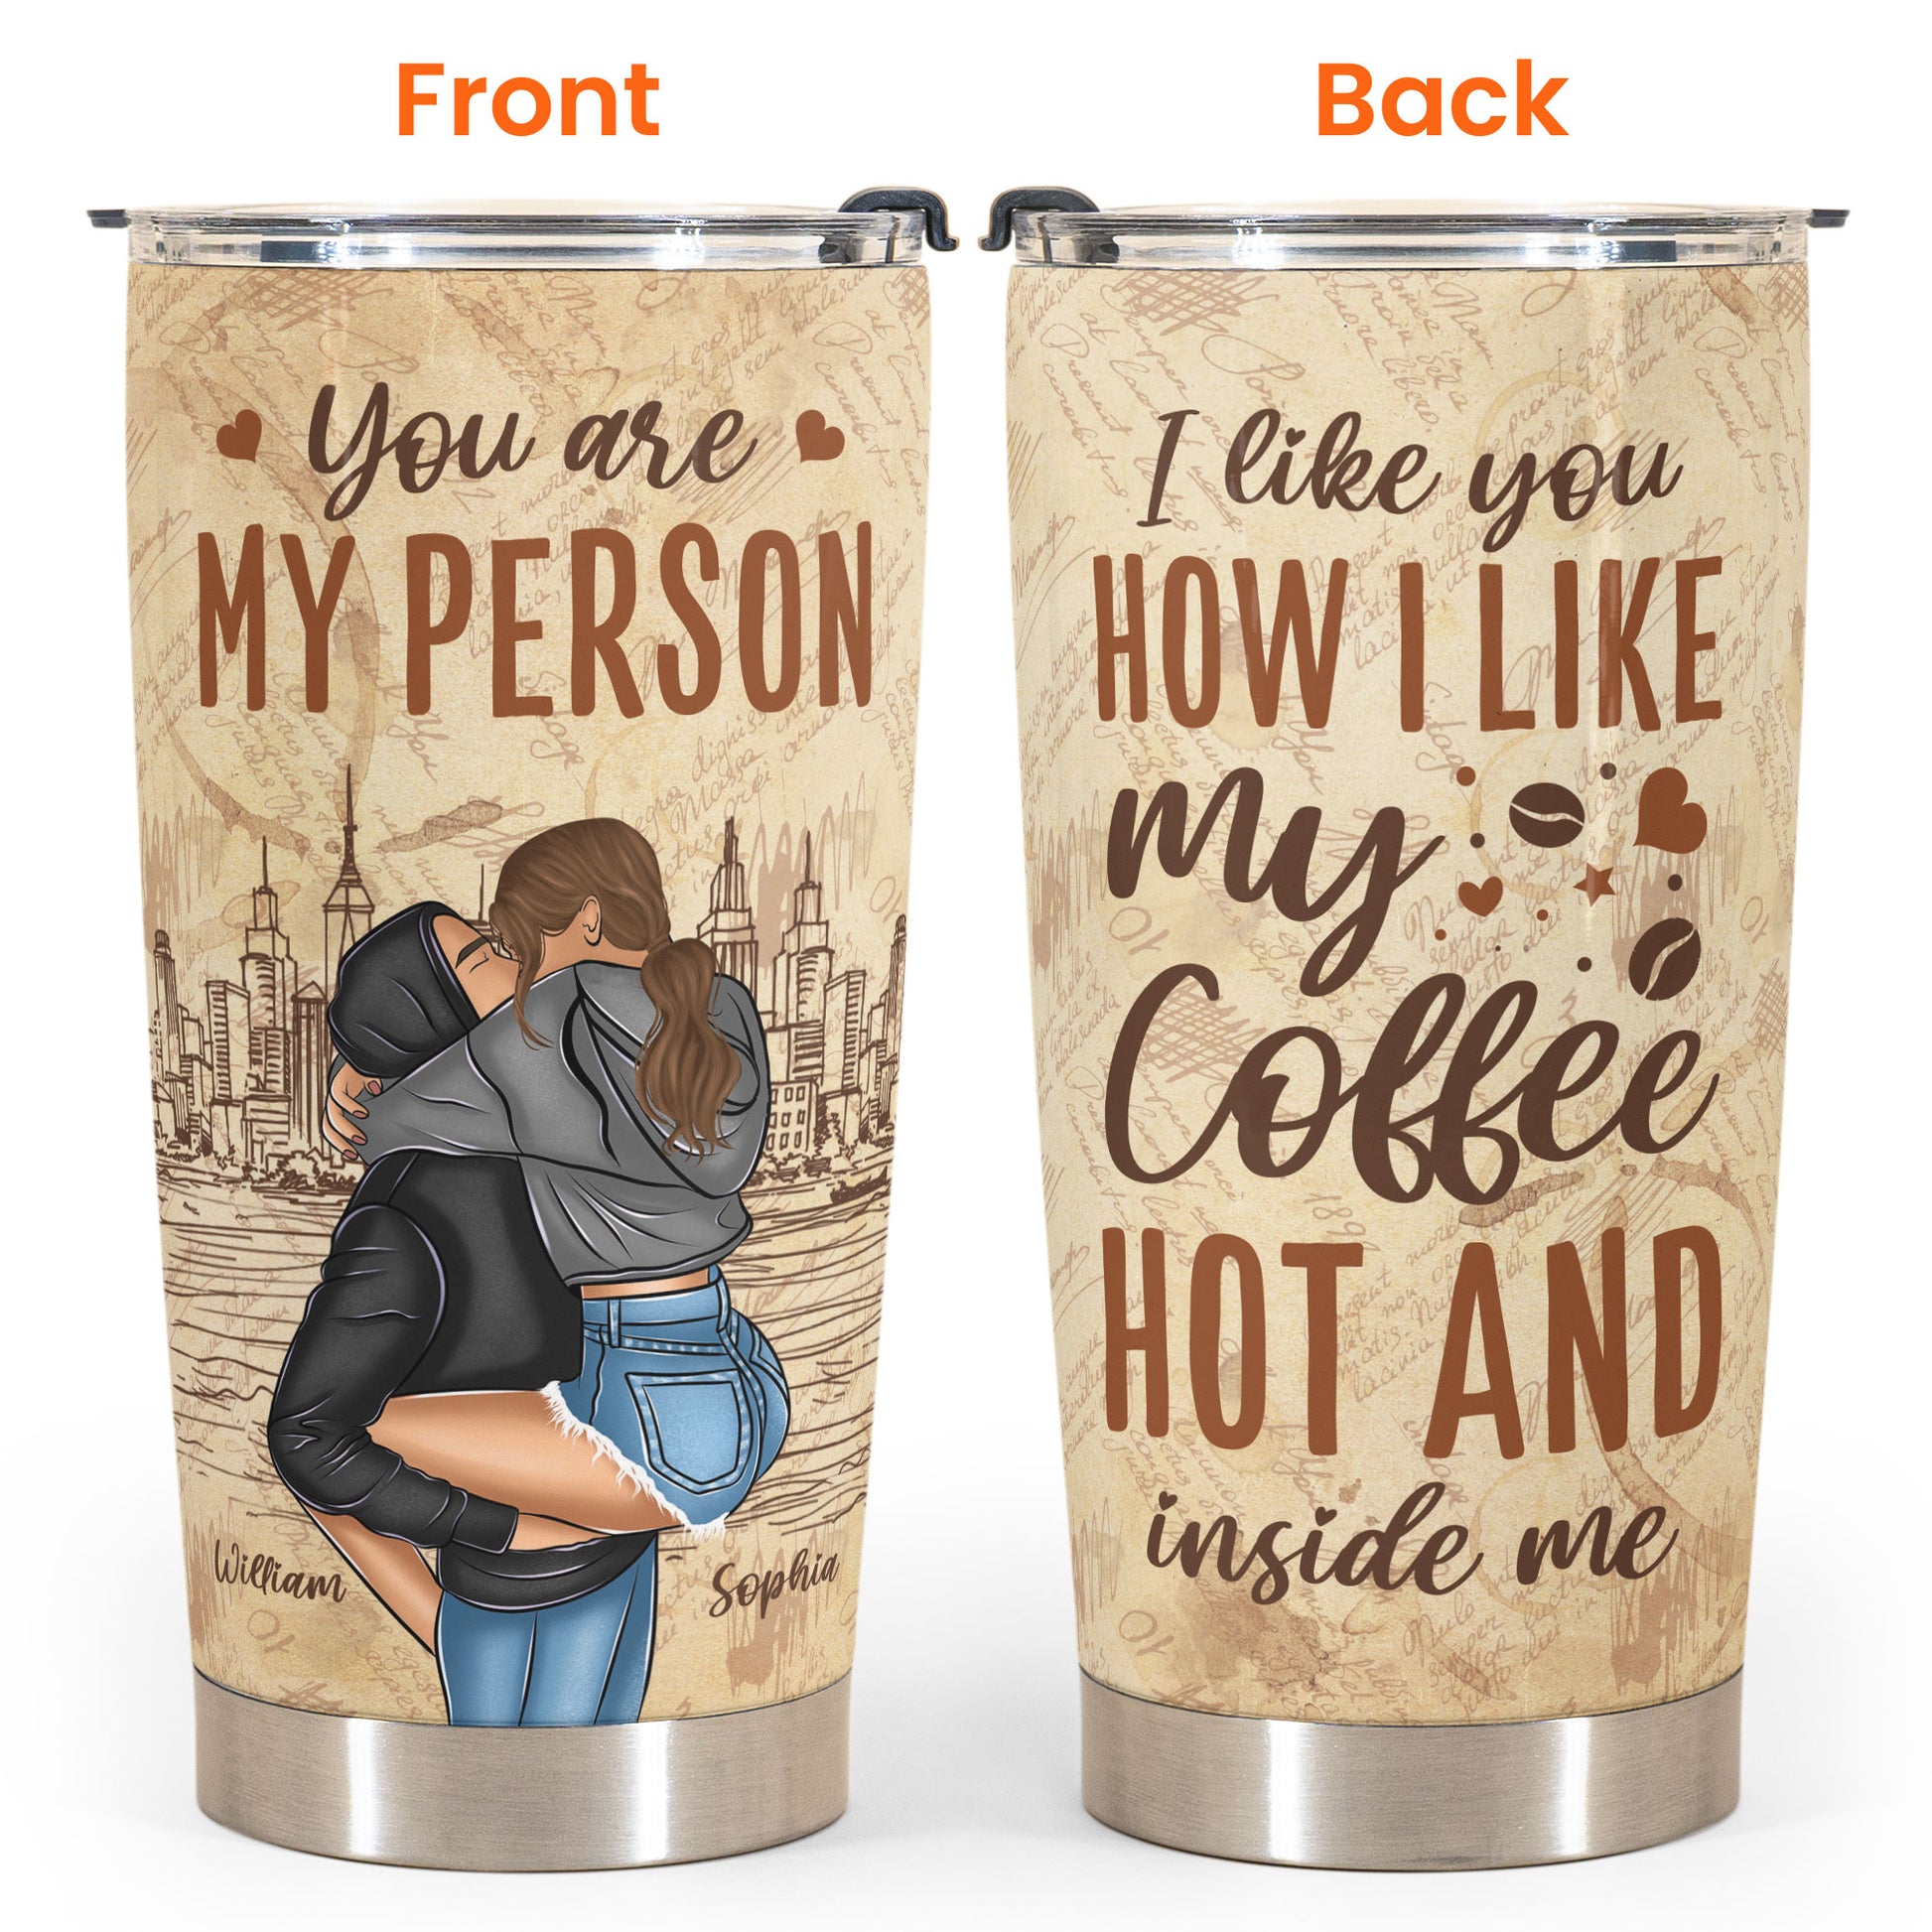 I Like You How I Like My Coffee, Hot And Inside Me - Personalized Tumbler Cup - Birthday, Loving Gift For Couples, Husband, Wife, Boyfriend, Girlfriend